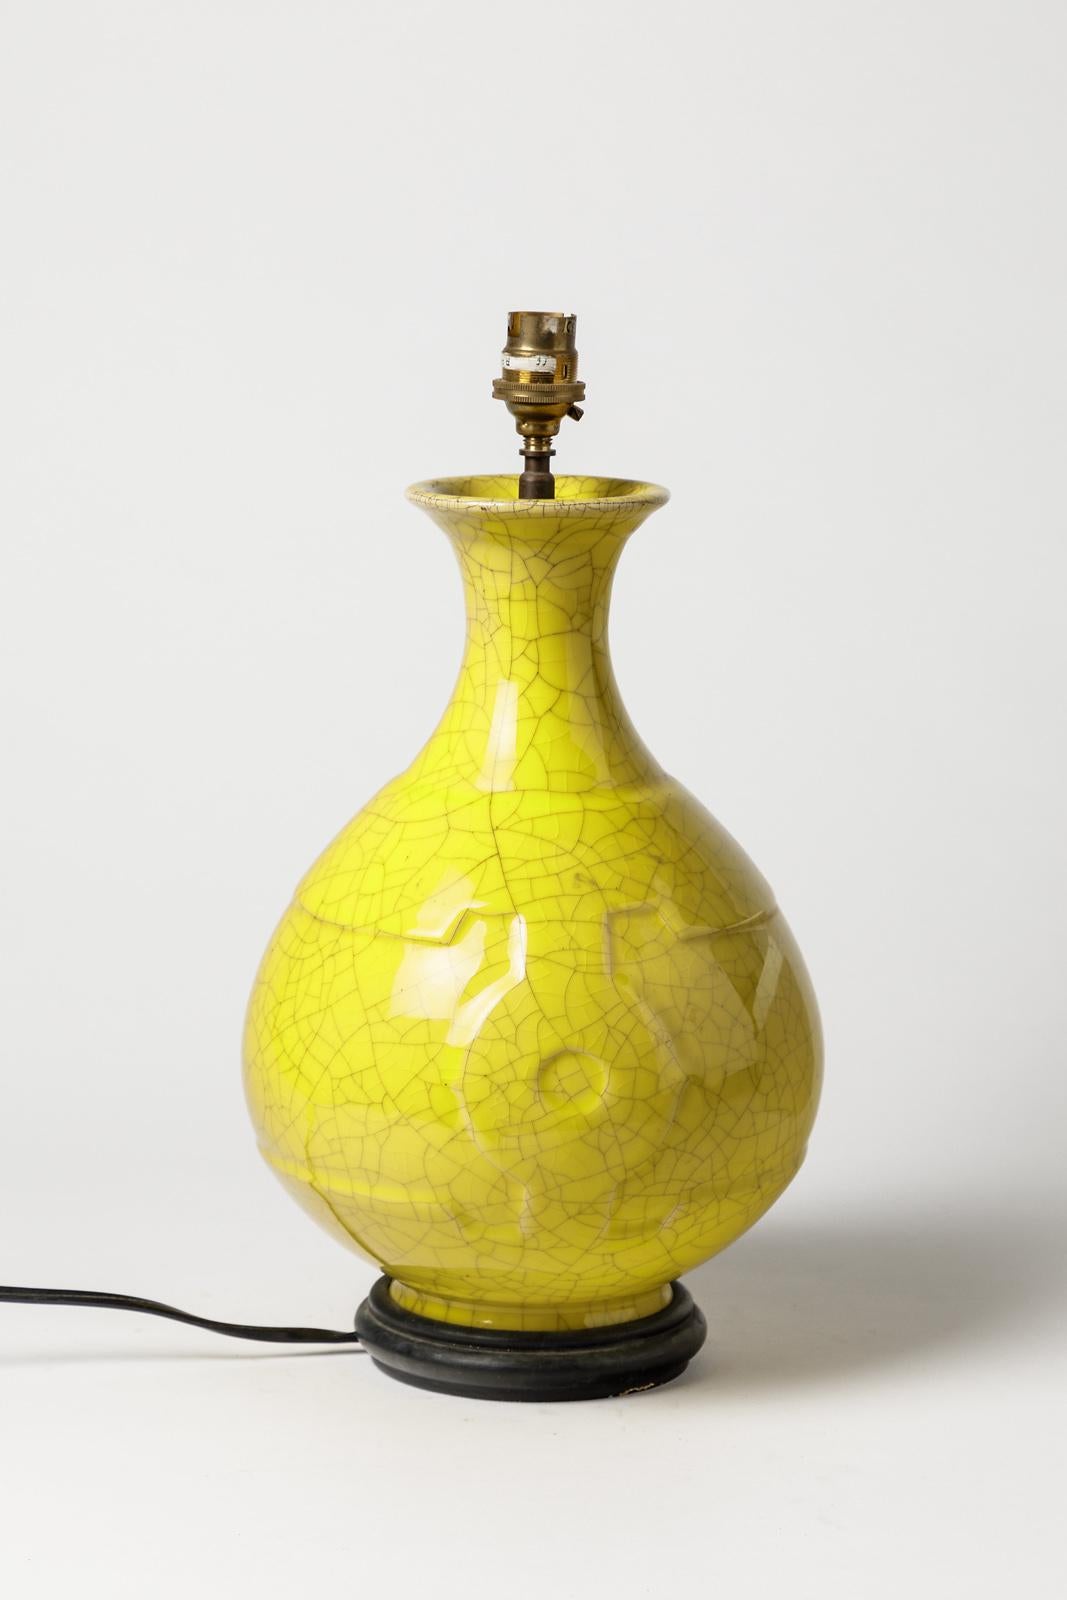 Art Deco ceramic table lamp

Elegant and shinny yellow ceramic glaze color

circa 1930, Art Deco period with asian art decoration and forms influences

original perfet condition

Electric system is ok

Lamp dimensions without electric